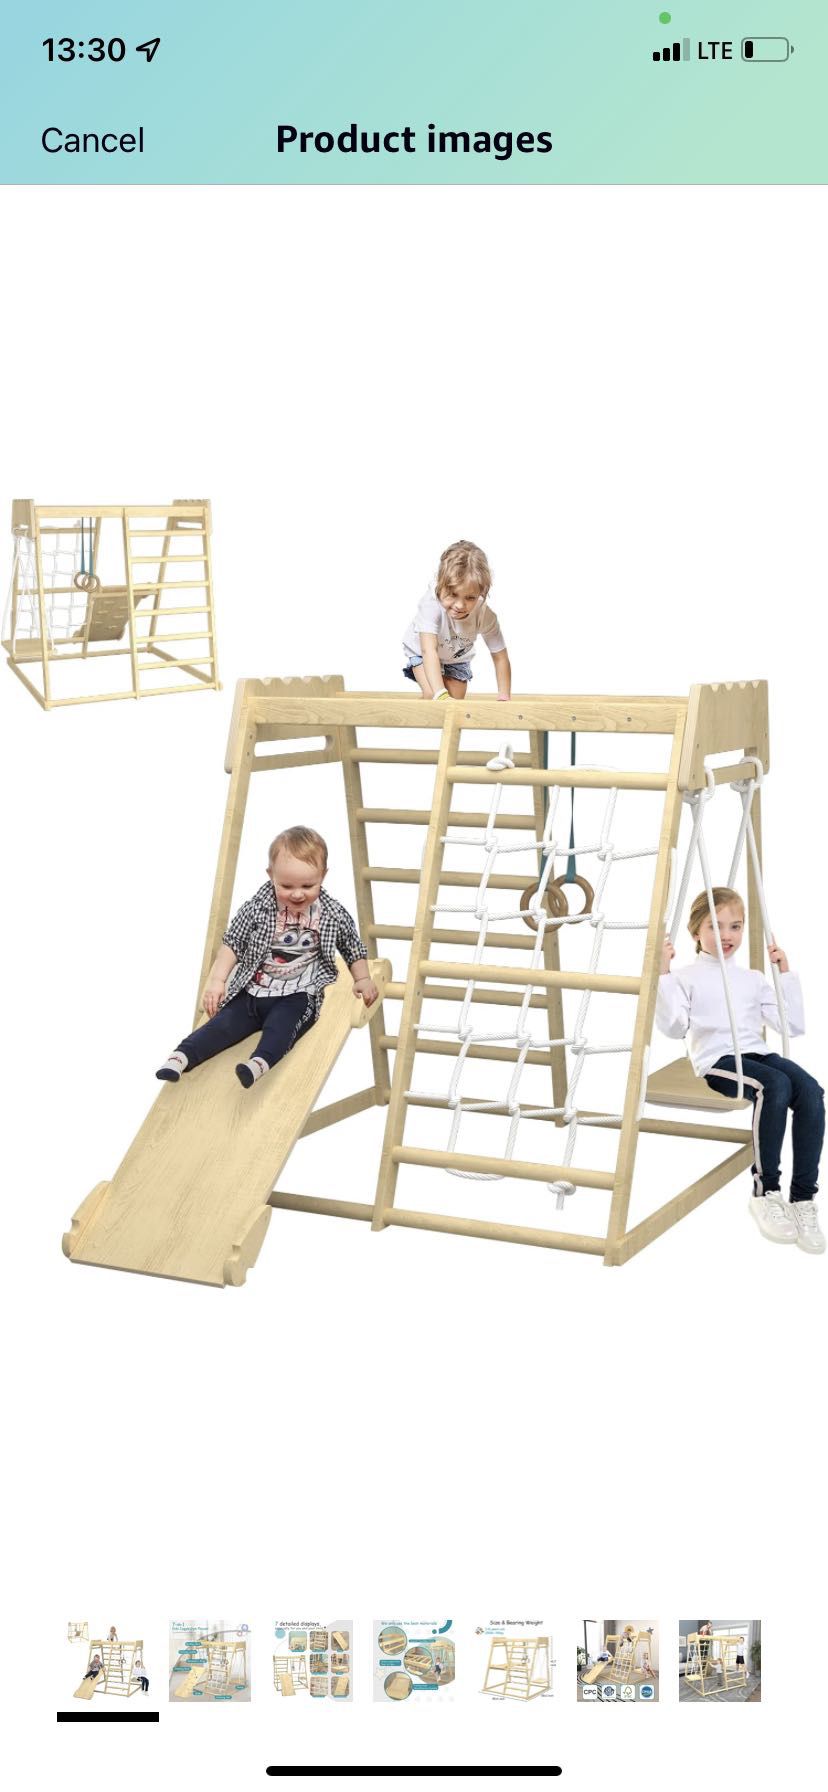 8 in 1 Indoor Play Kids Gym,Indoor Kids Playground,Climbing Toys for Toddlers 3-8, Climber Playset with Slide, Climbing Rock/Net, Climbing Ladder, Mon